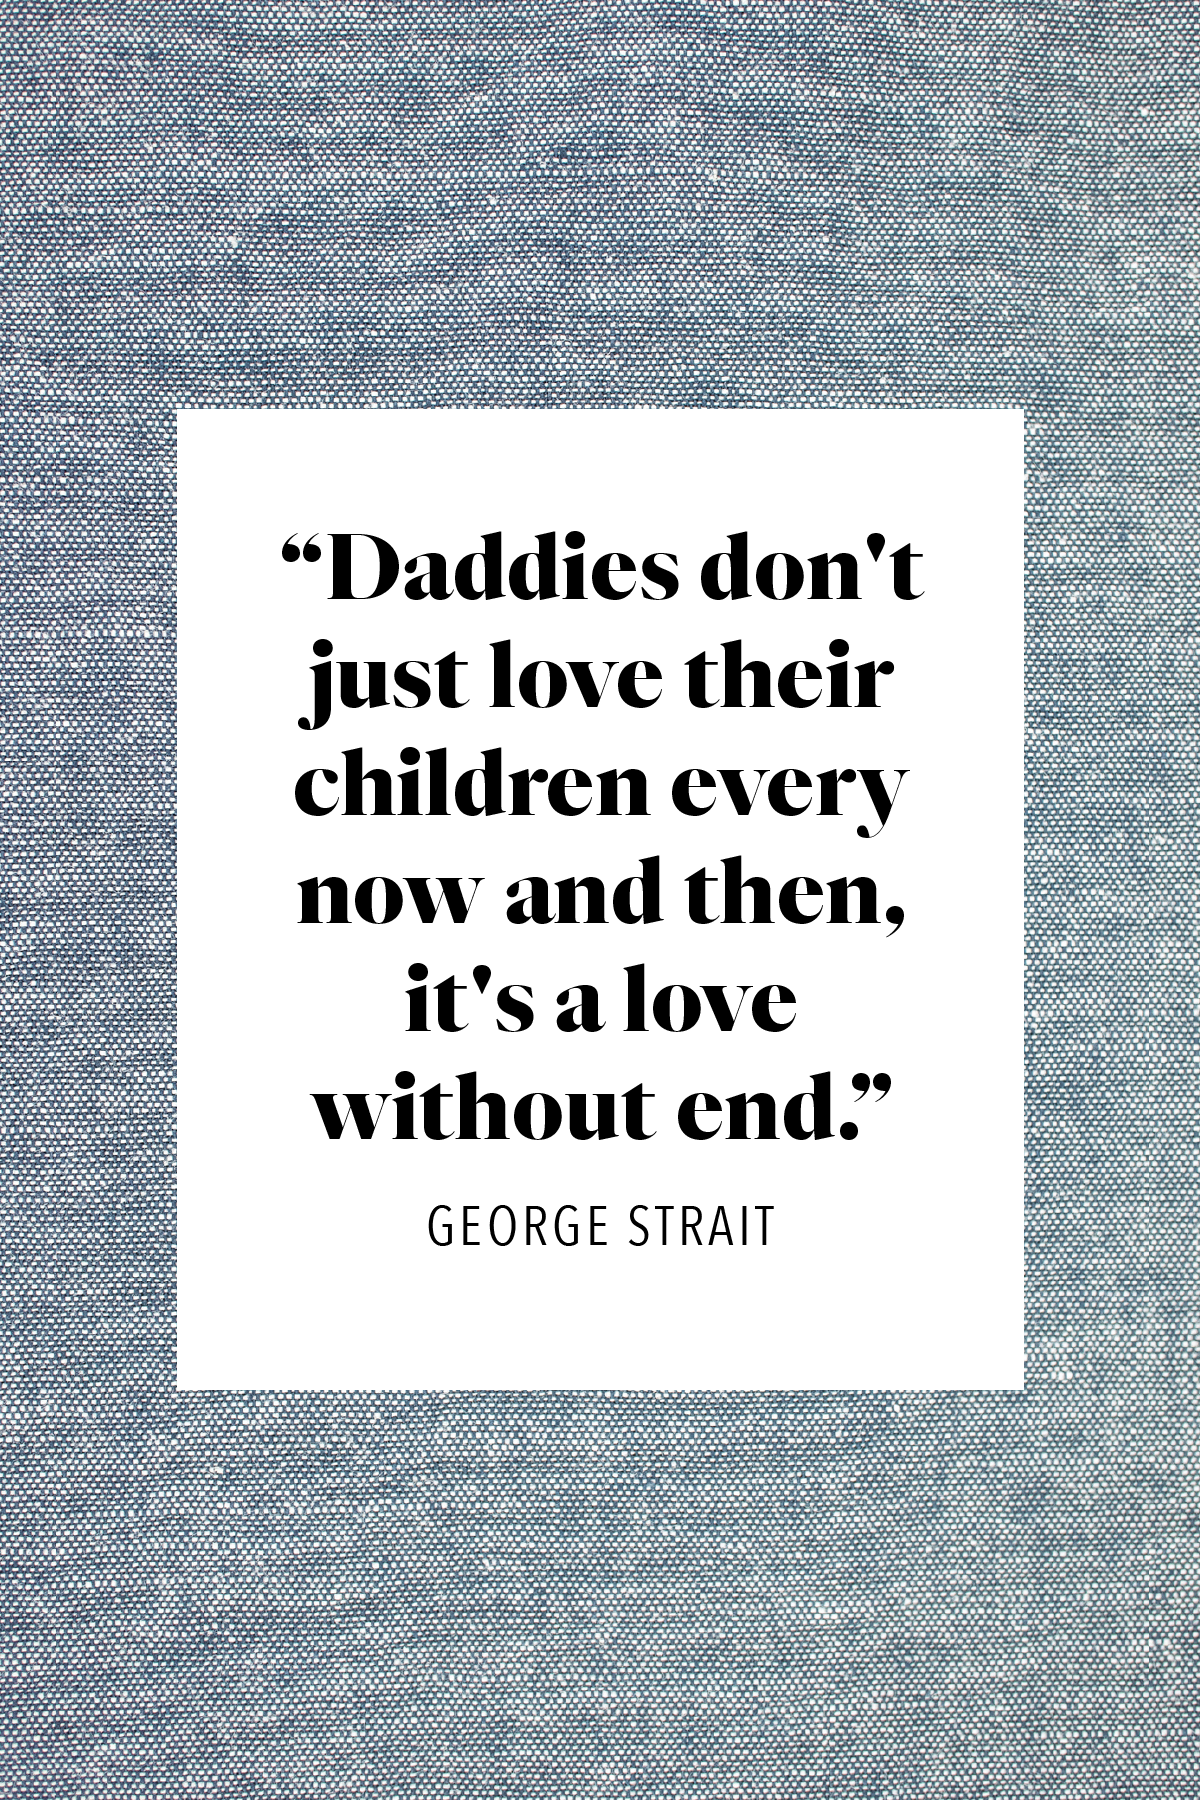 fathers day quote 12 1588004232